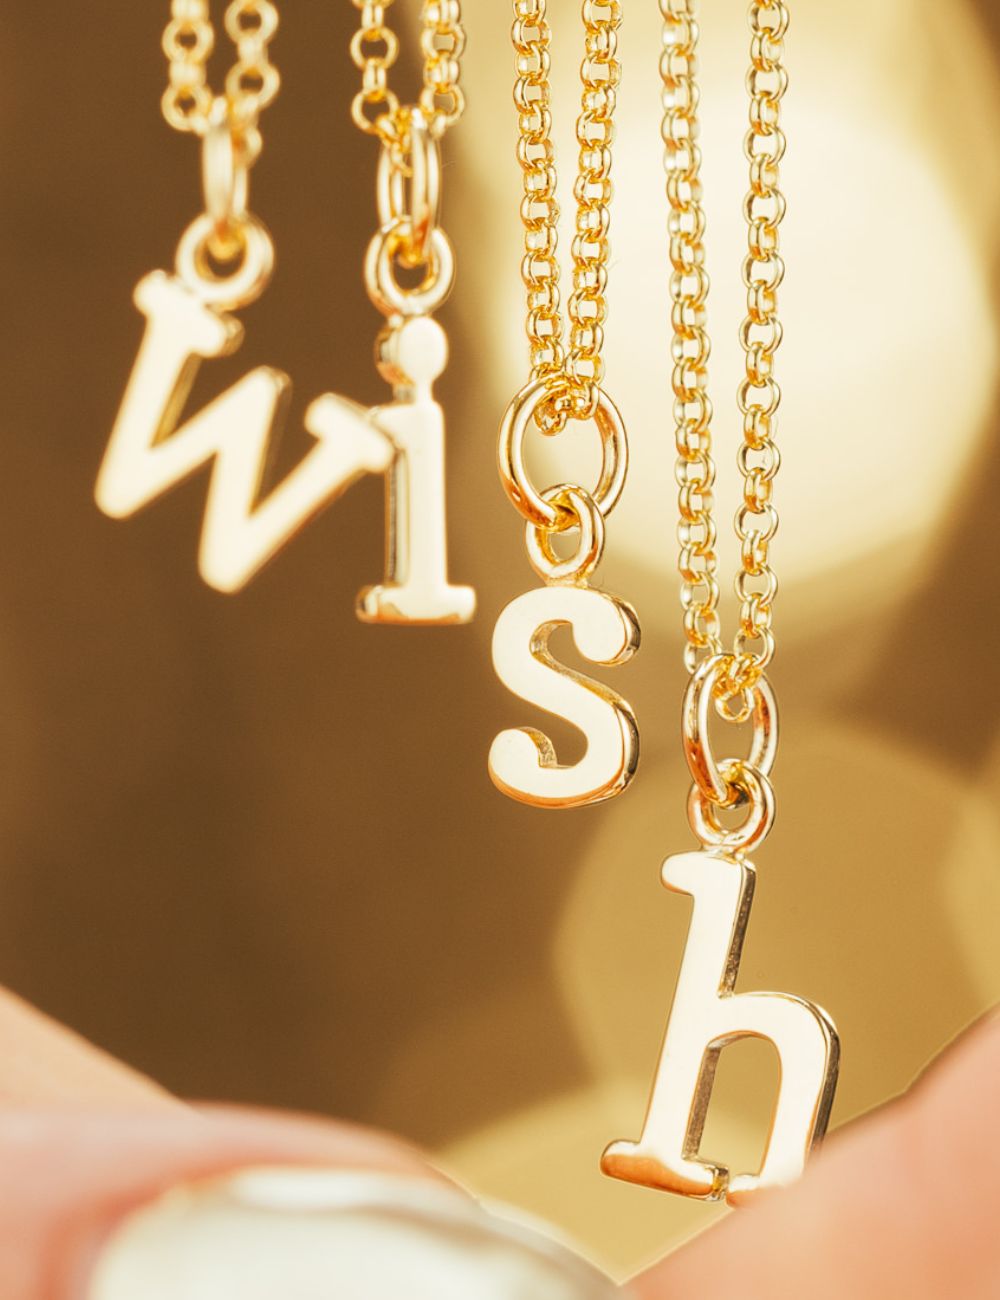 26ct Silver Alphabet Charms by hildie & jo